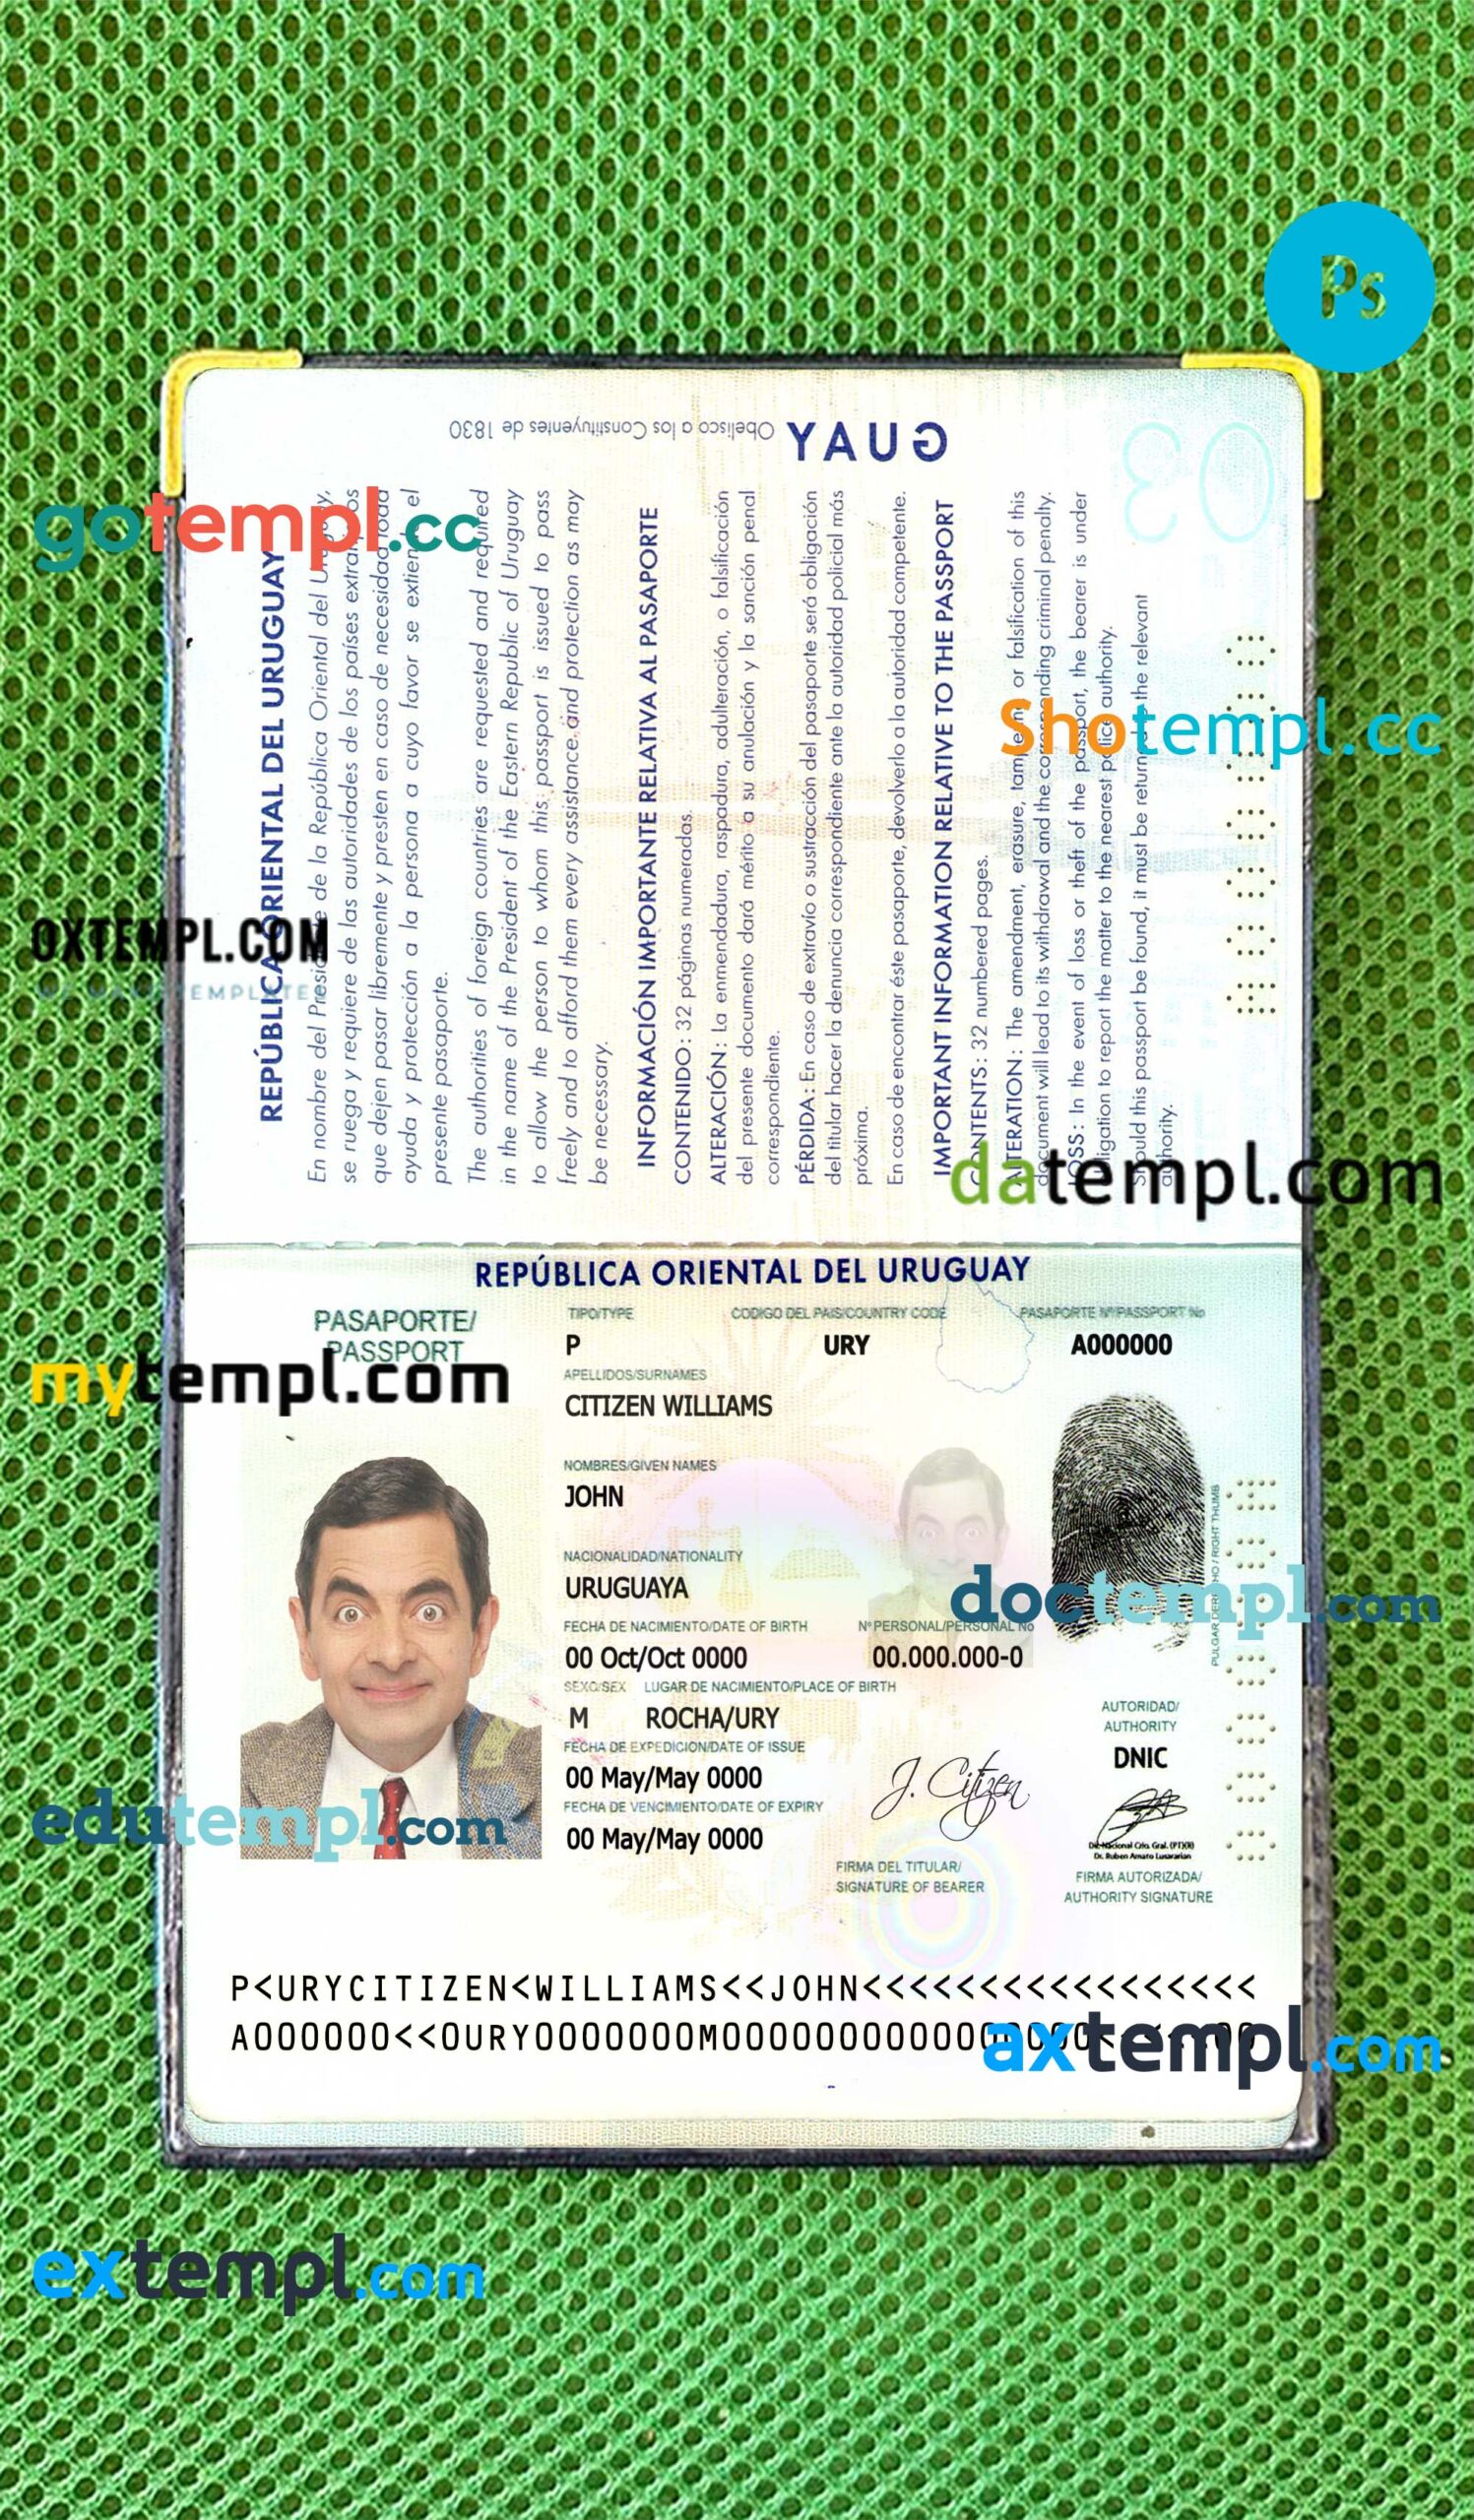 Uruguay passport PSD files, editable scan and photo-realistic look sample, 2 in 1